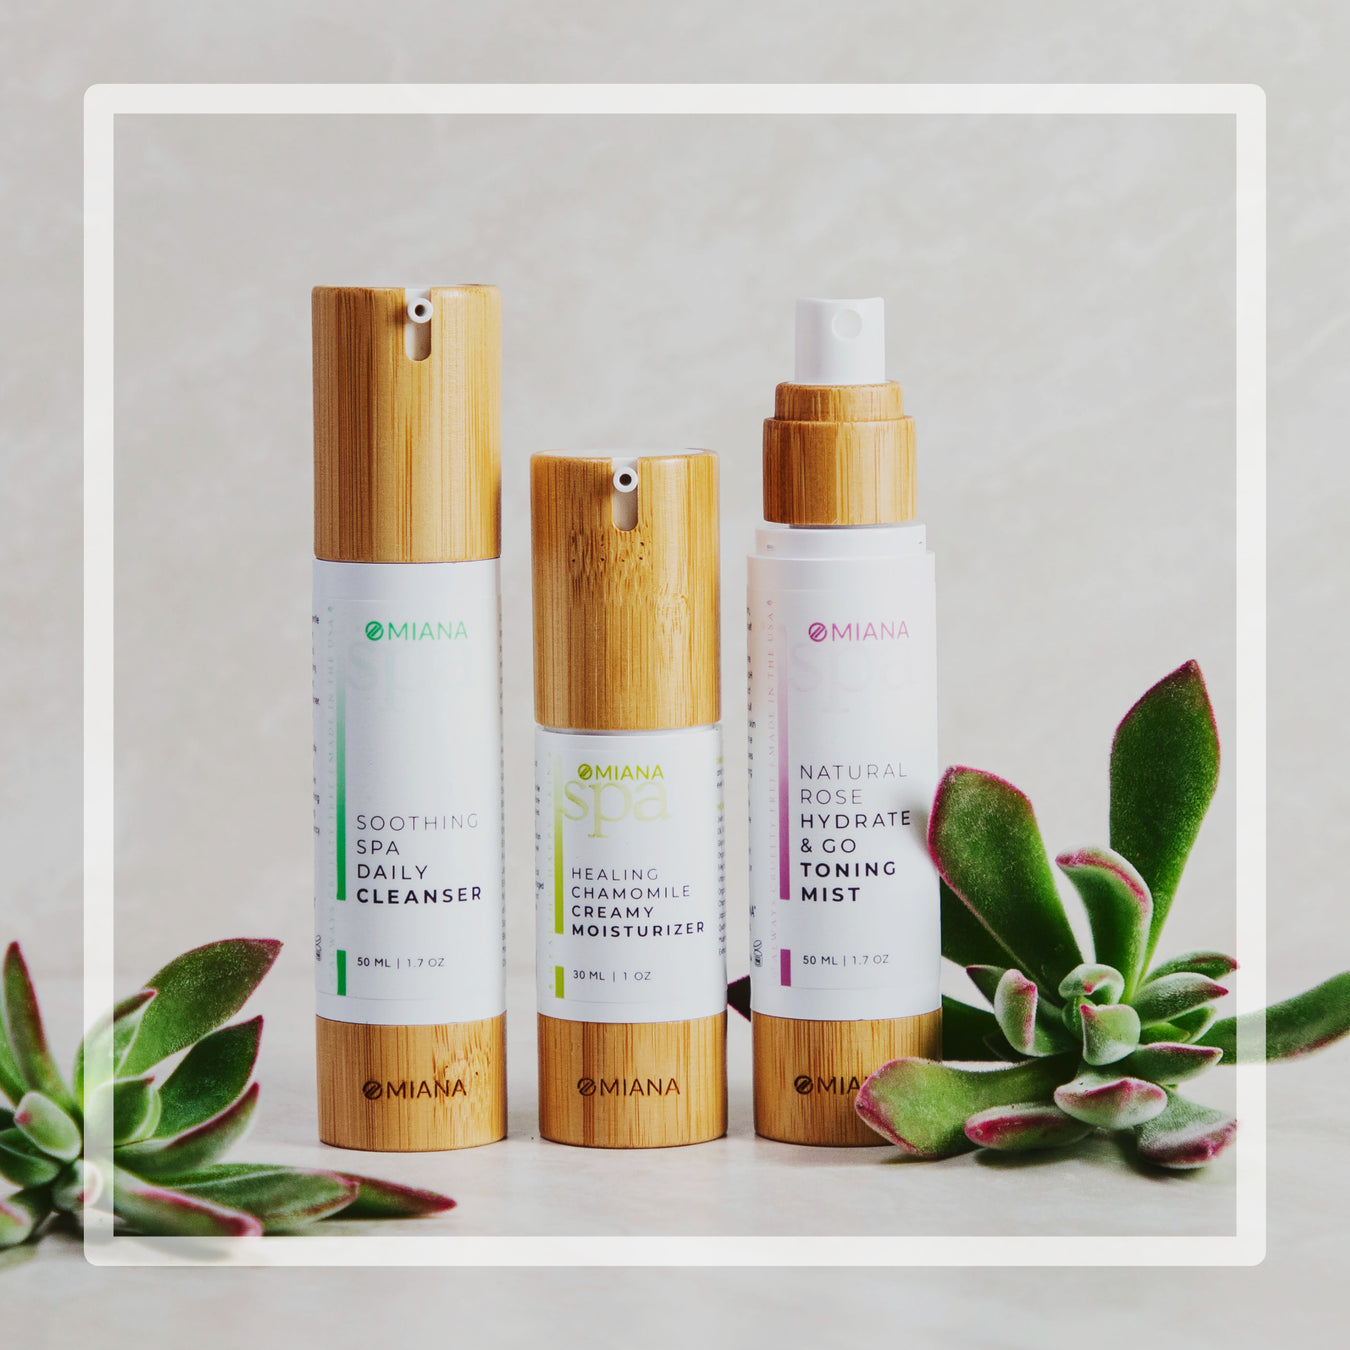 Naturally Crafted Skincare